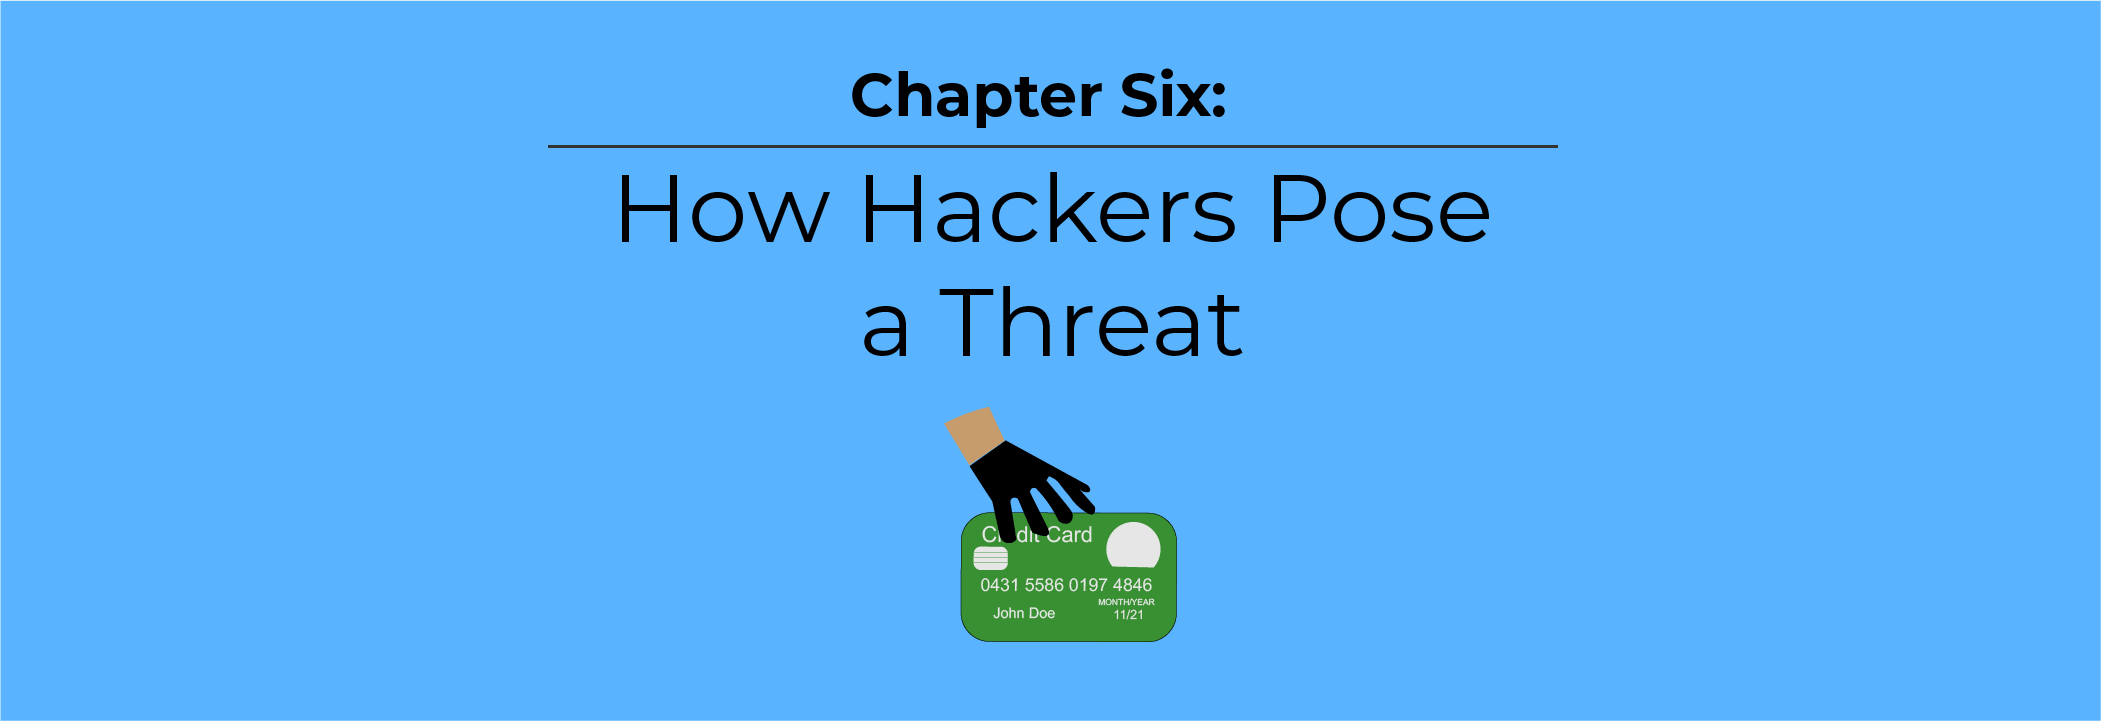 How Hackers Pose a Threat